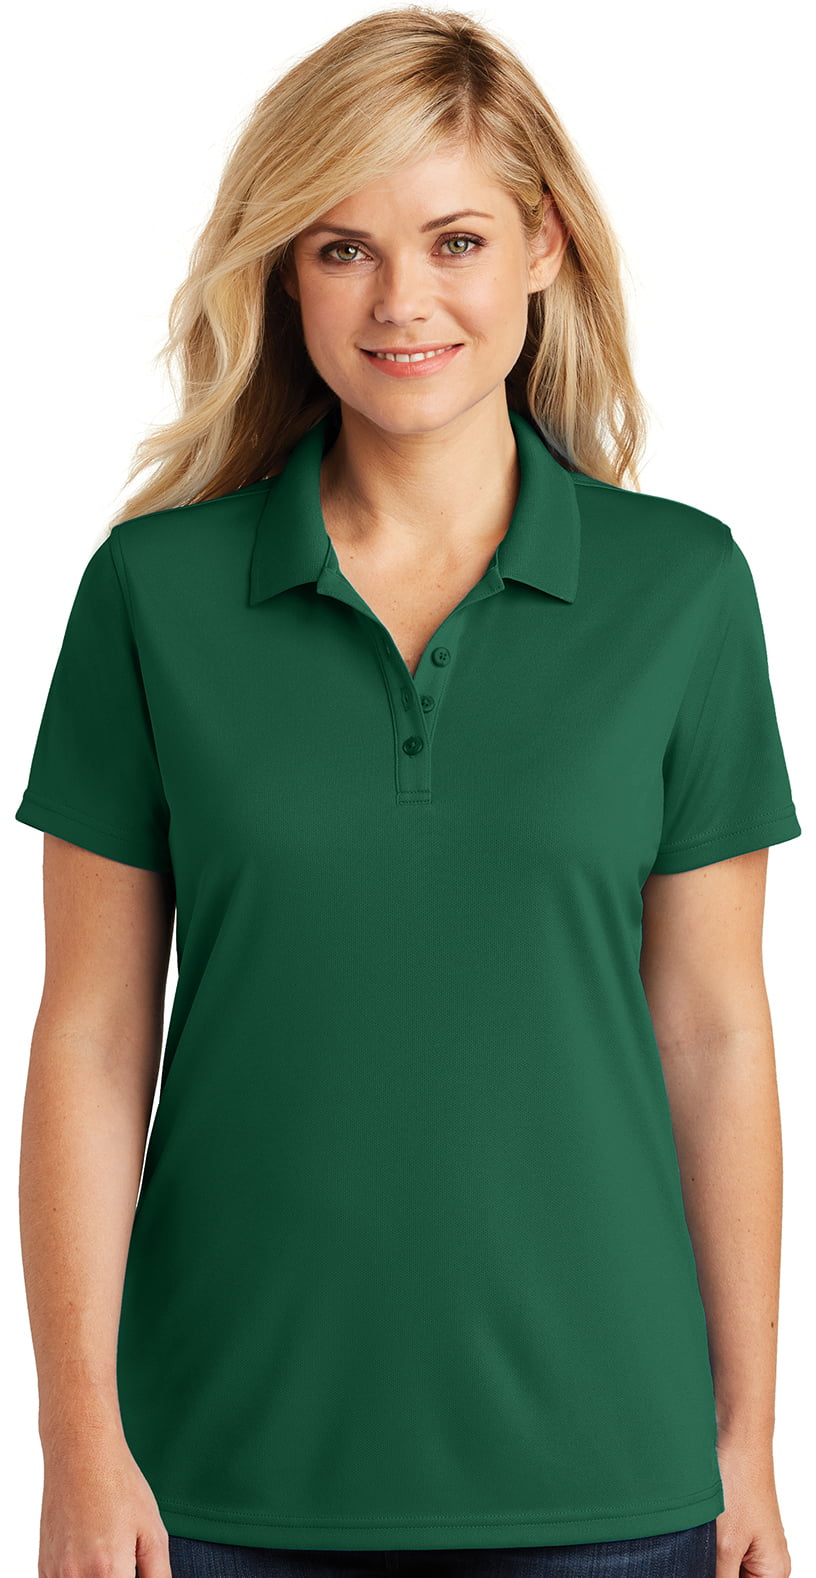 Womens Upscale Style Moisture-Wicking Polo Shirt, 3XL Bright Kelly Green